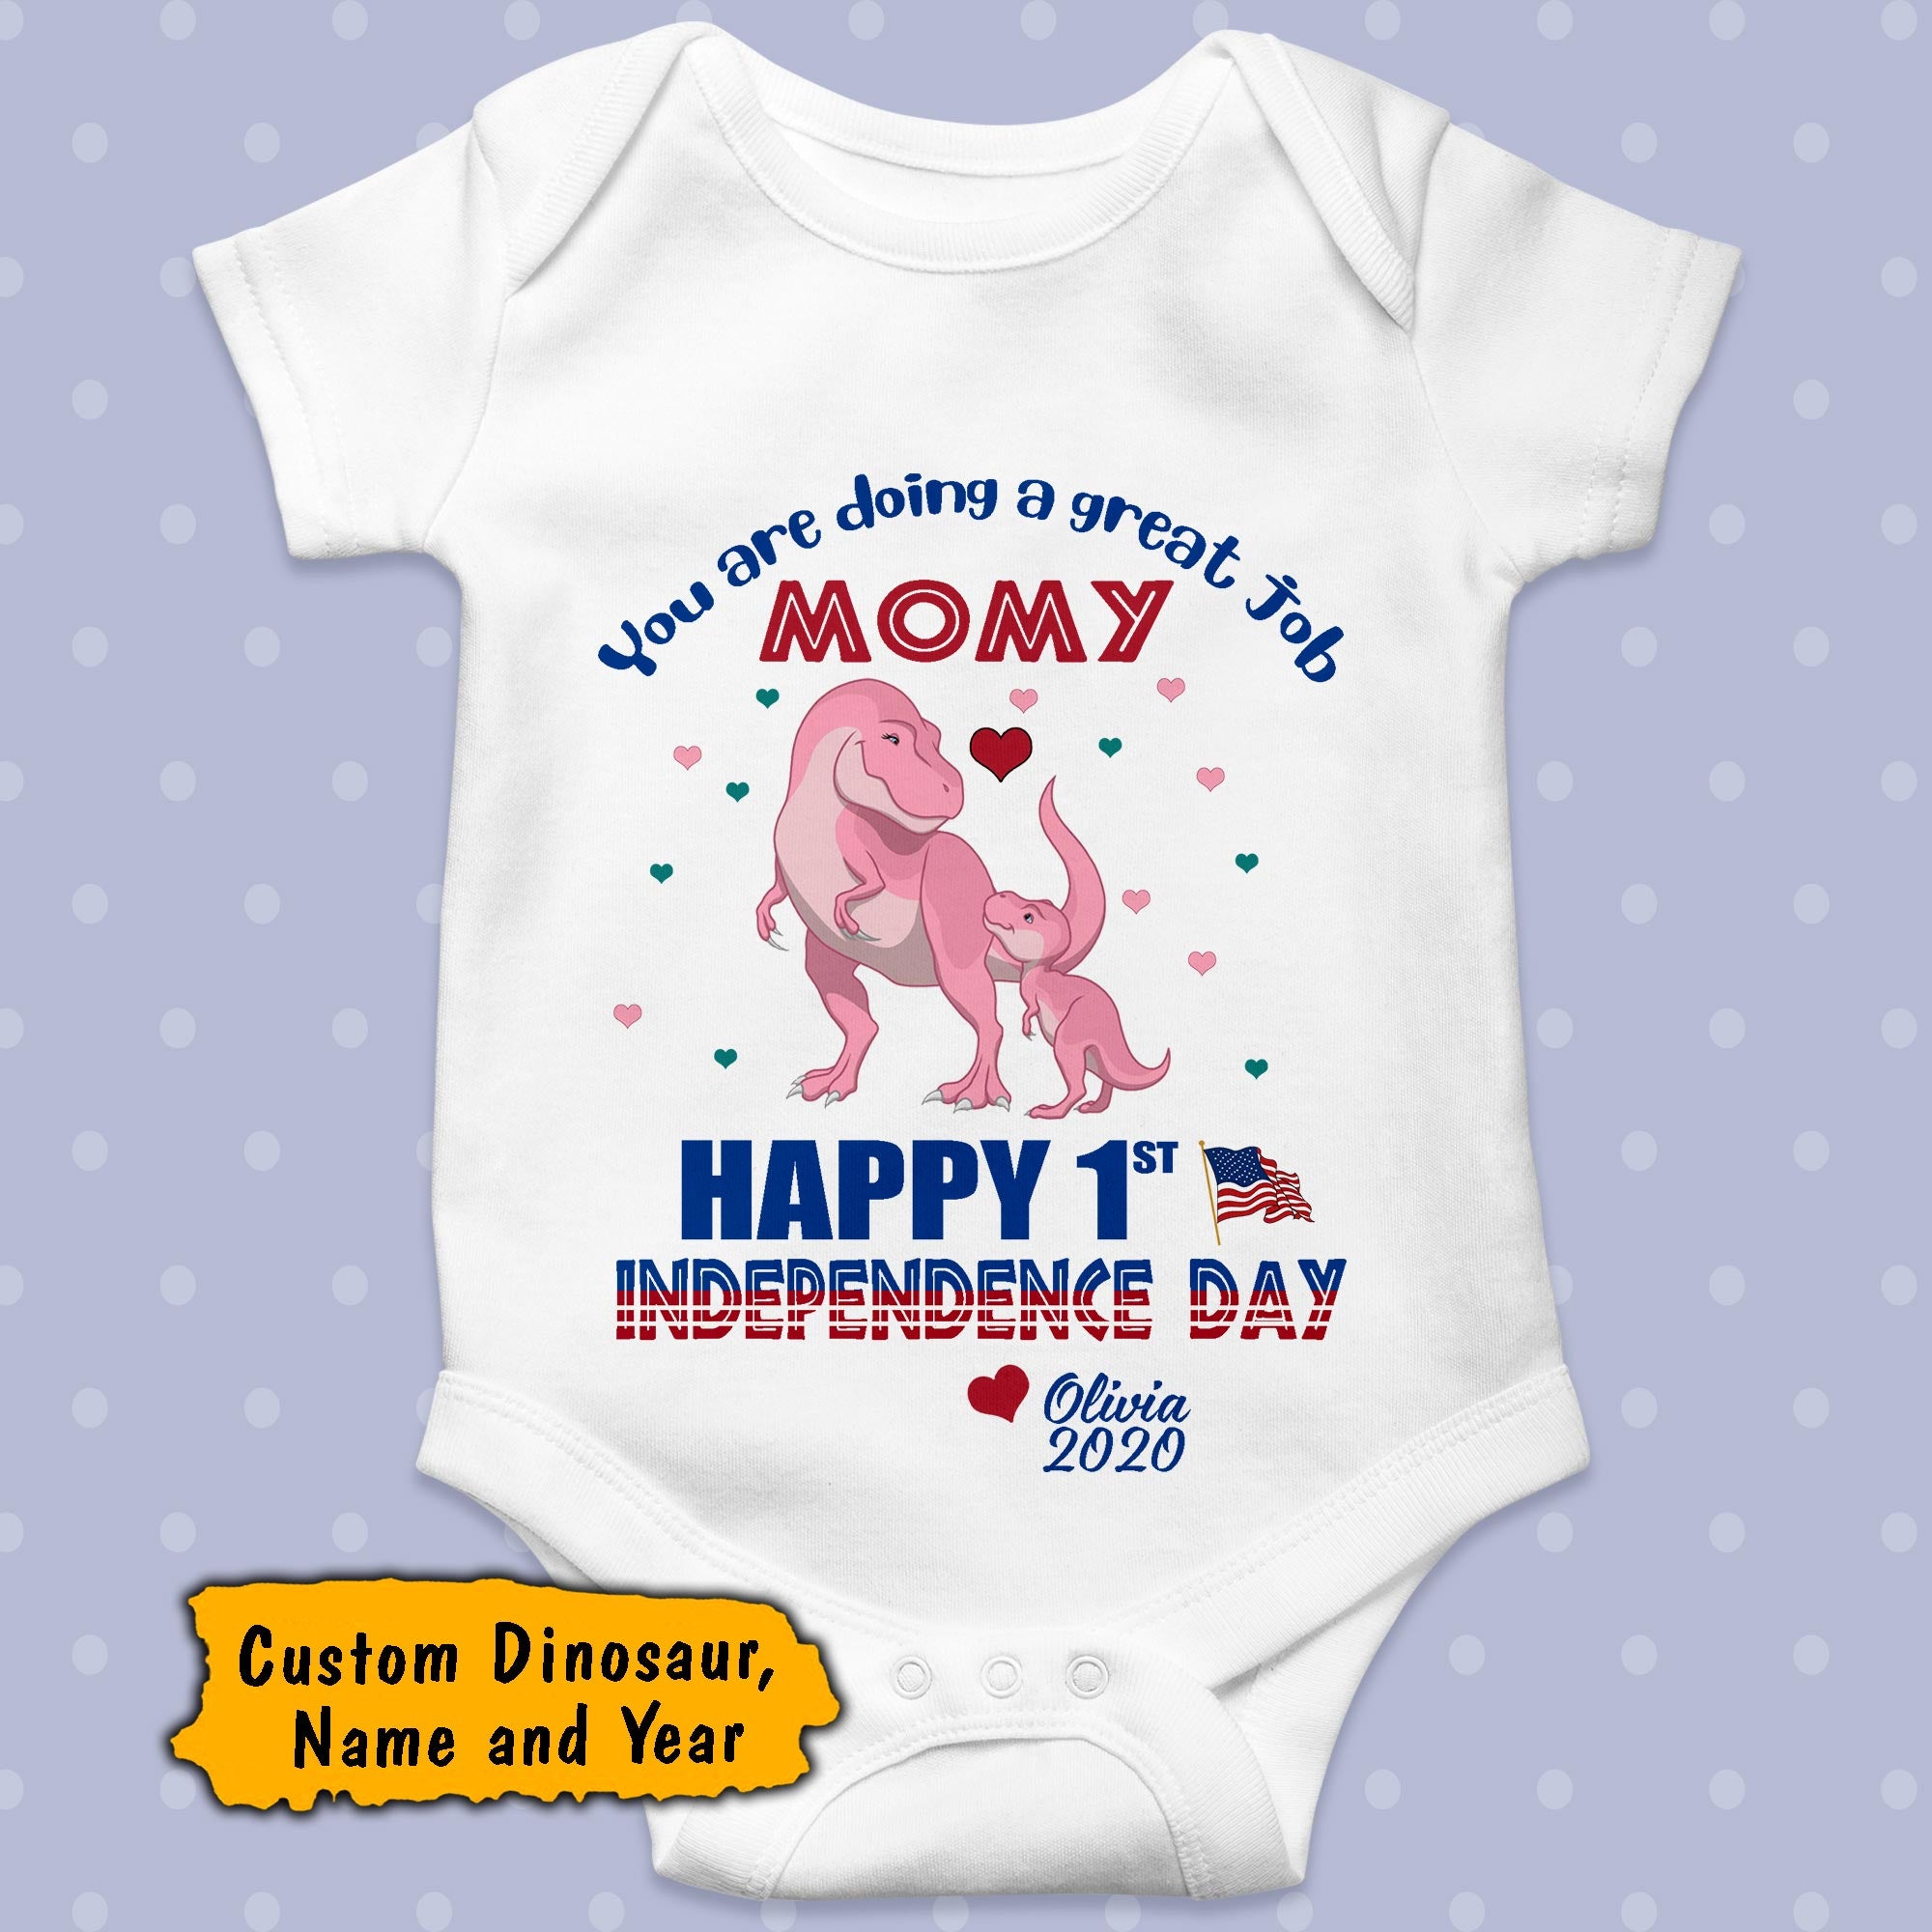 Personalized Happy First Independen Day Baby Onesie. Custom Family, Baby Shirt